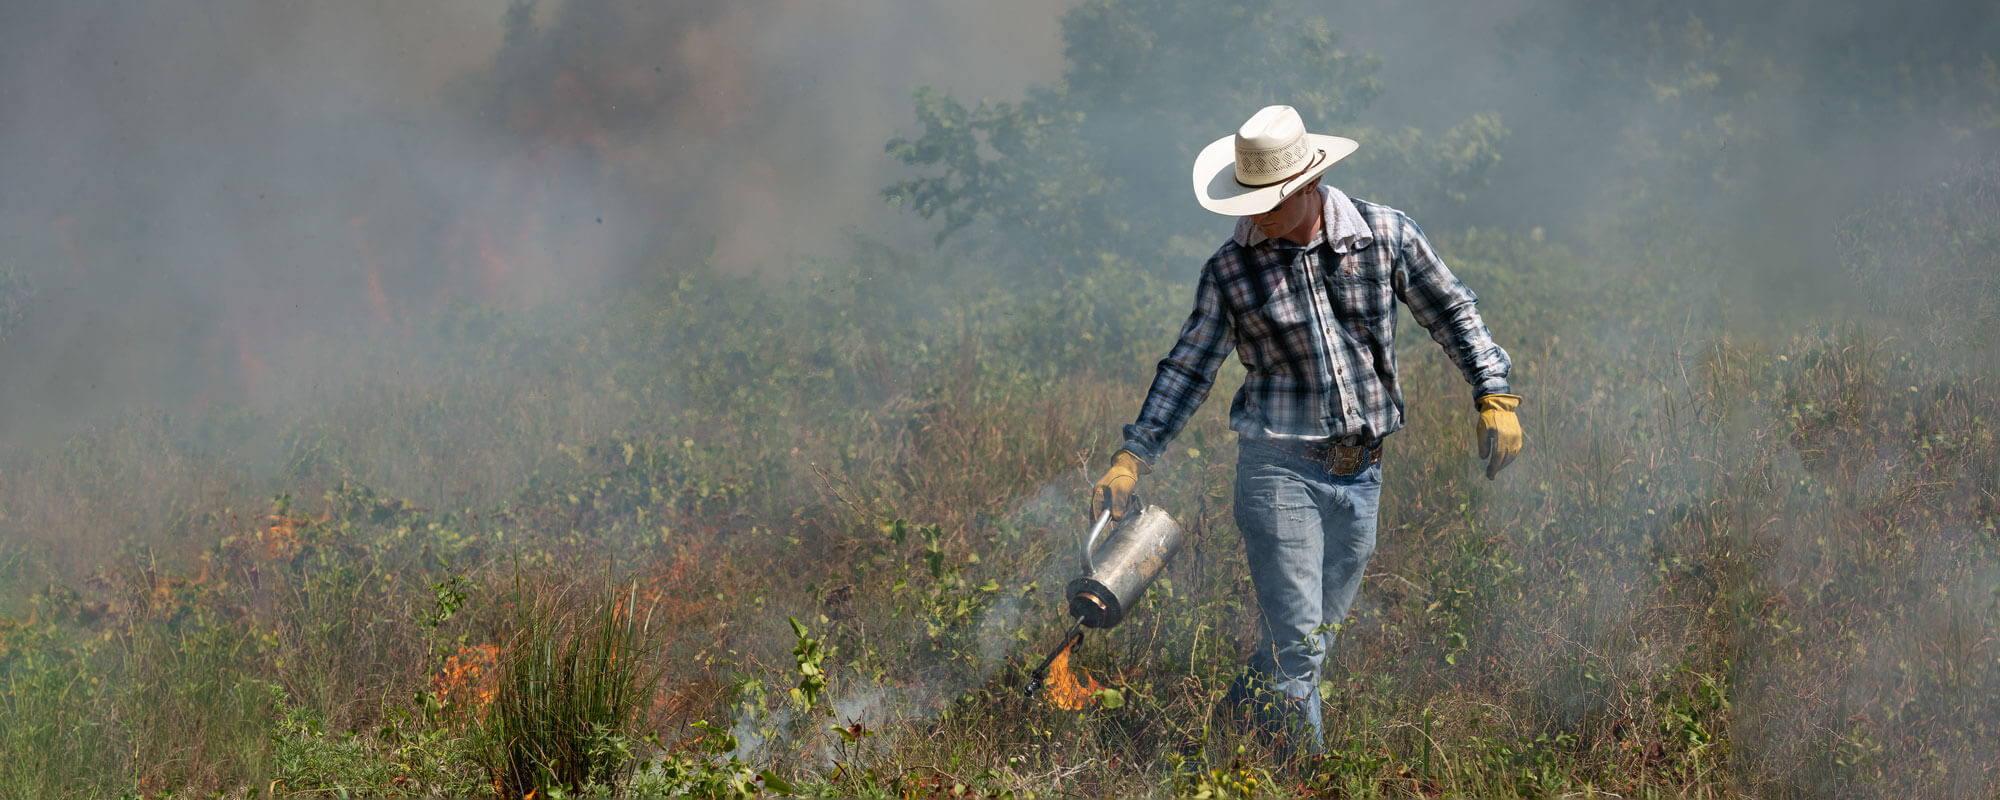 How Summer Prescribed Burns Can Be A Safe And Efficient Way To Regenerate Grazing Lands